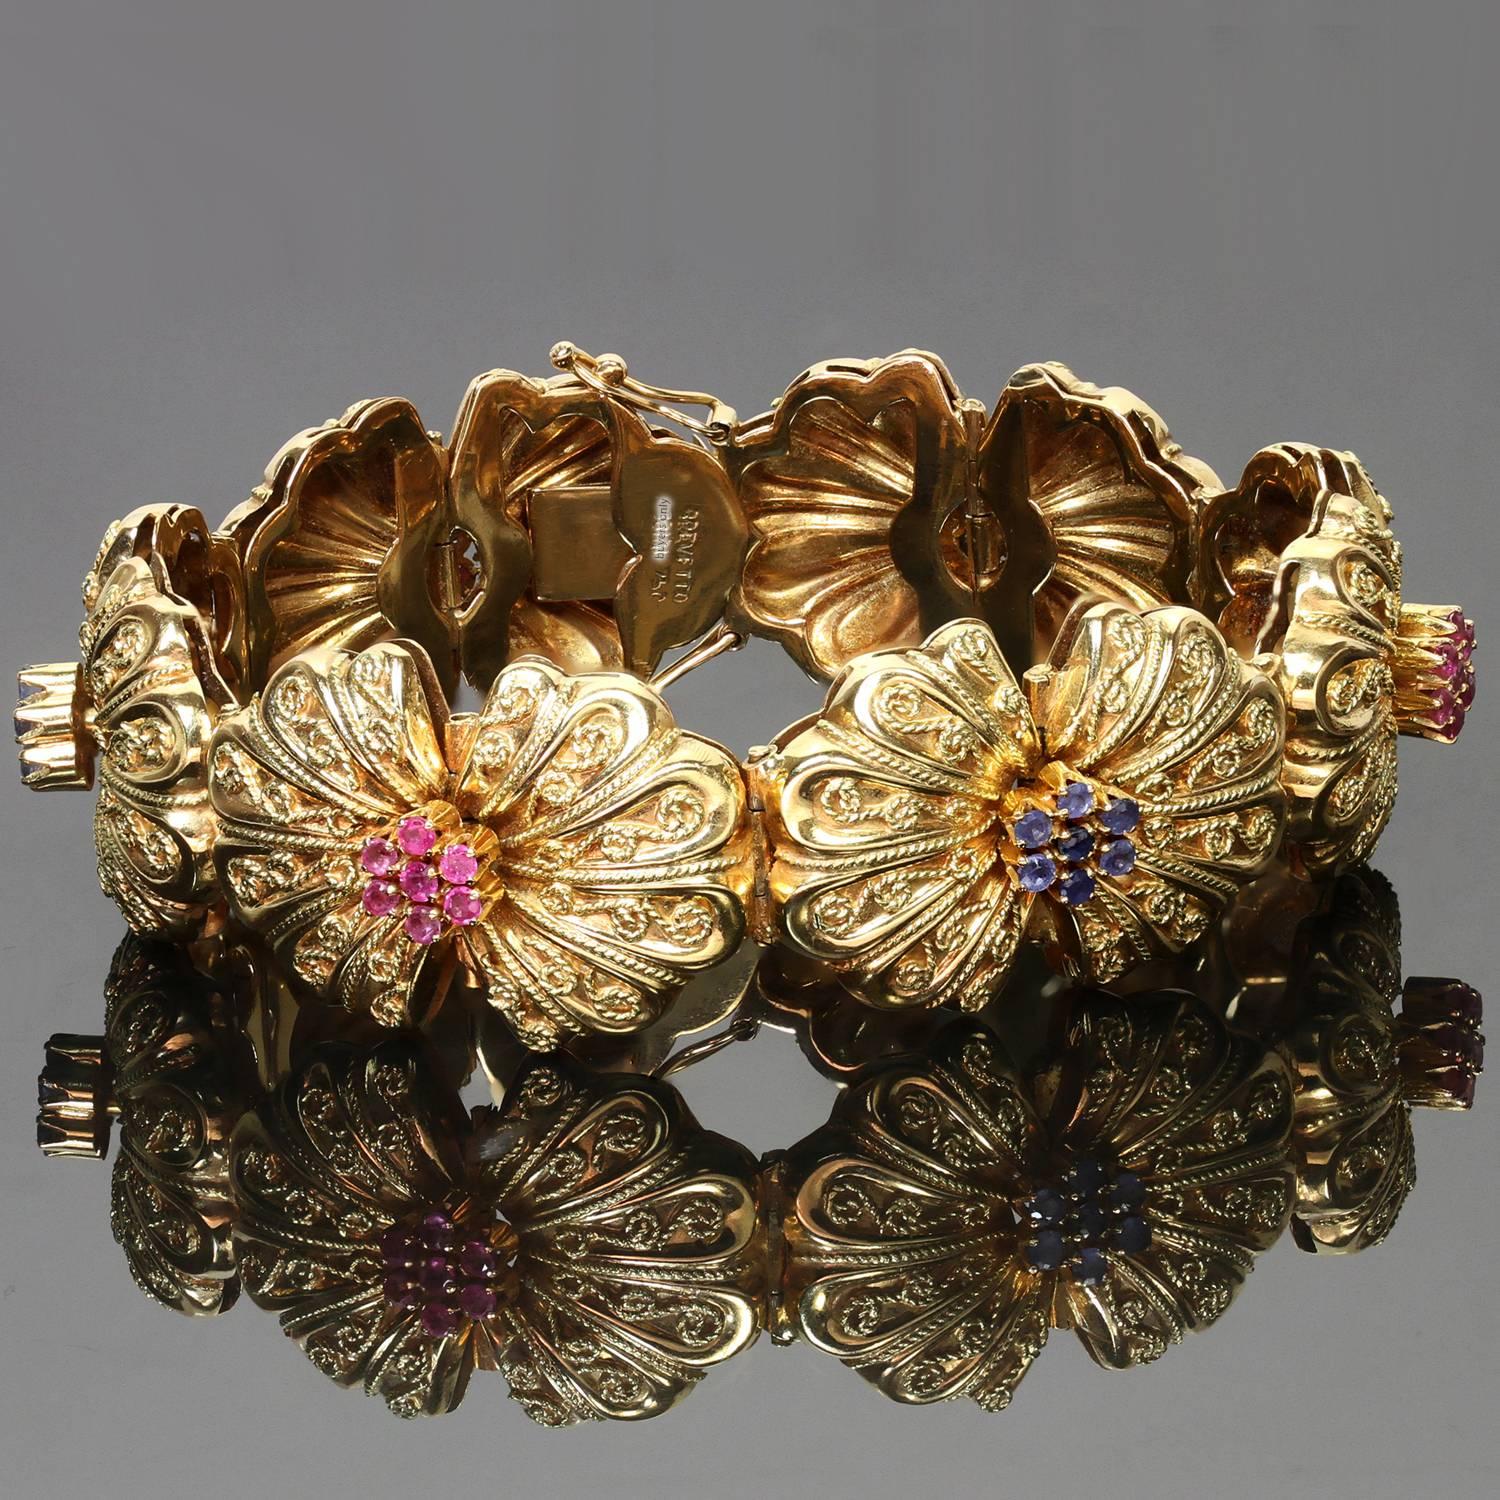 This fabulous antique Brevetto bracelet features six ornate links crafted in 18k yellow gold and beautifully prong-set with round faceted rubies and sapphires. Made in Italy circa 1940s. Measurements: 0.90